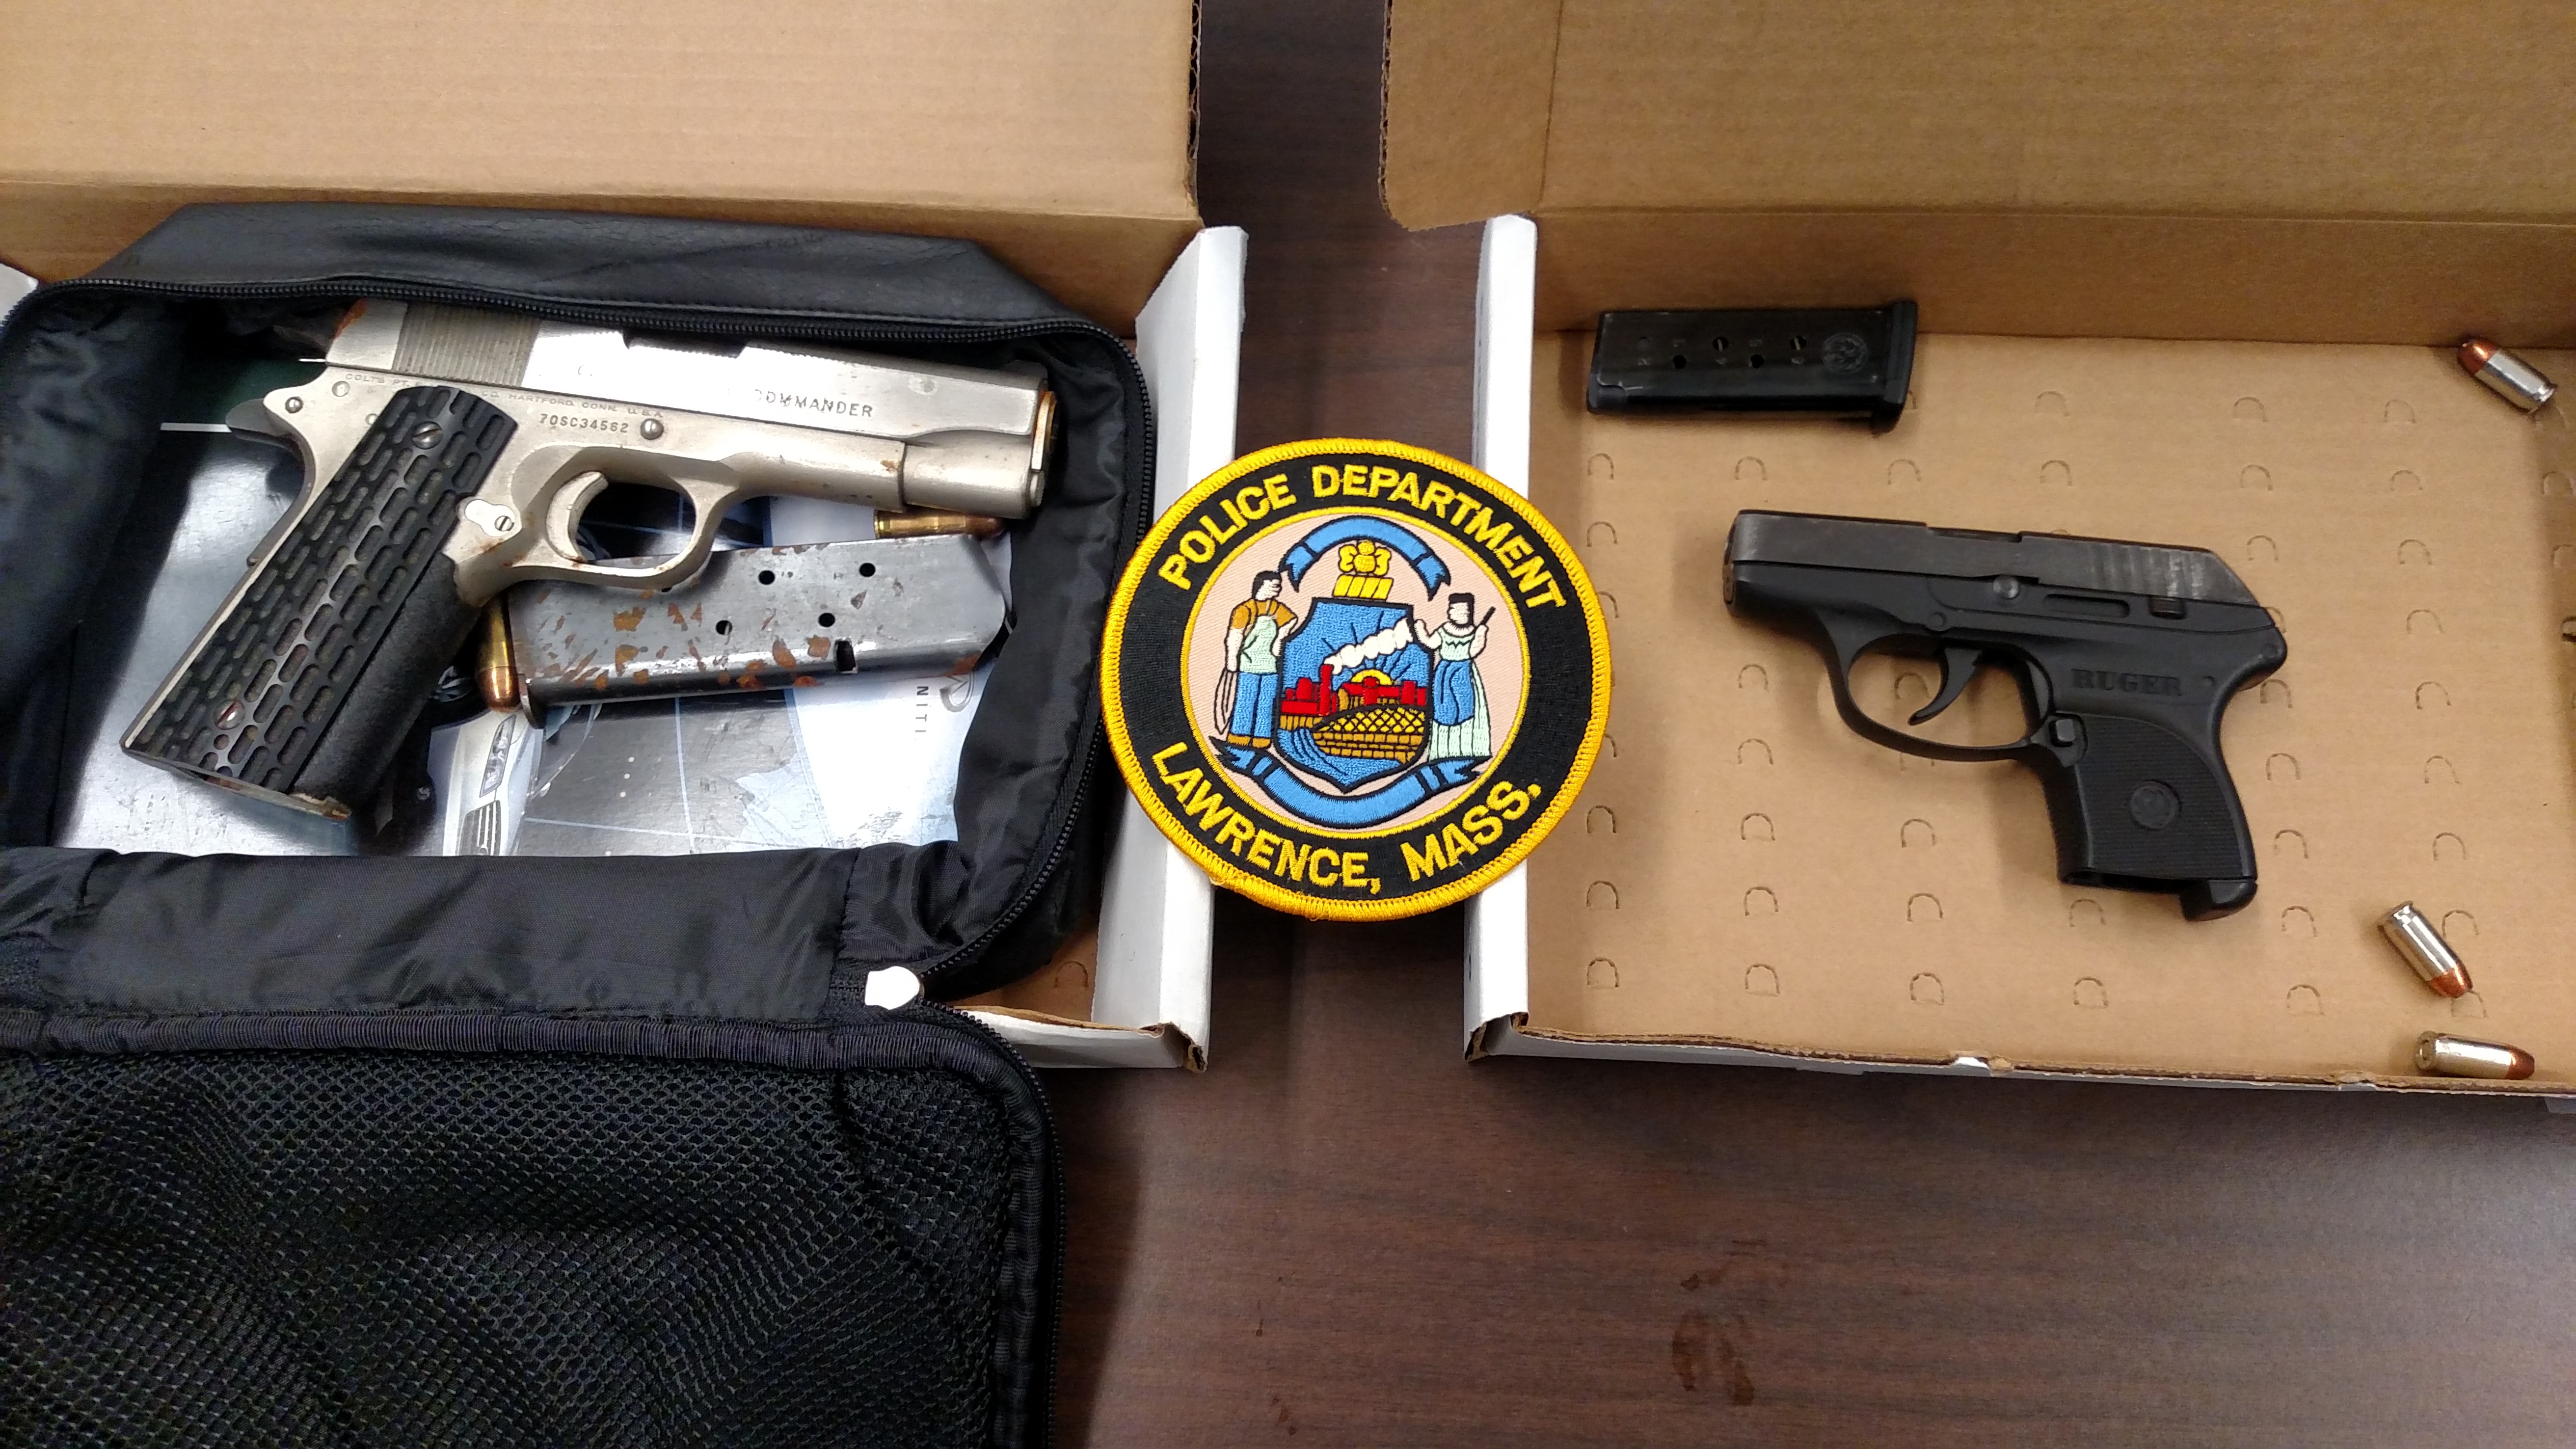 Lawrence Police Arrest Four on Firearm and Drug Charges